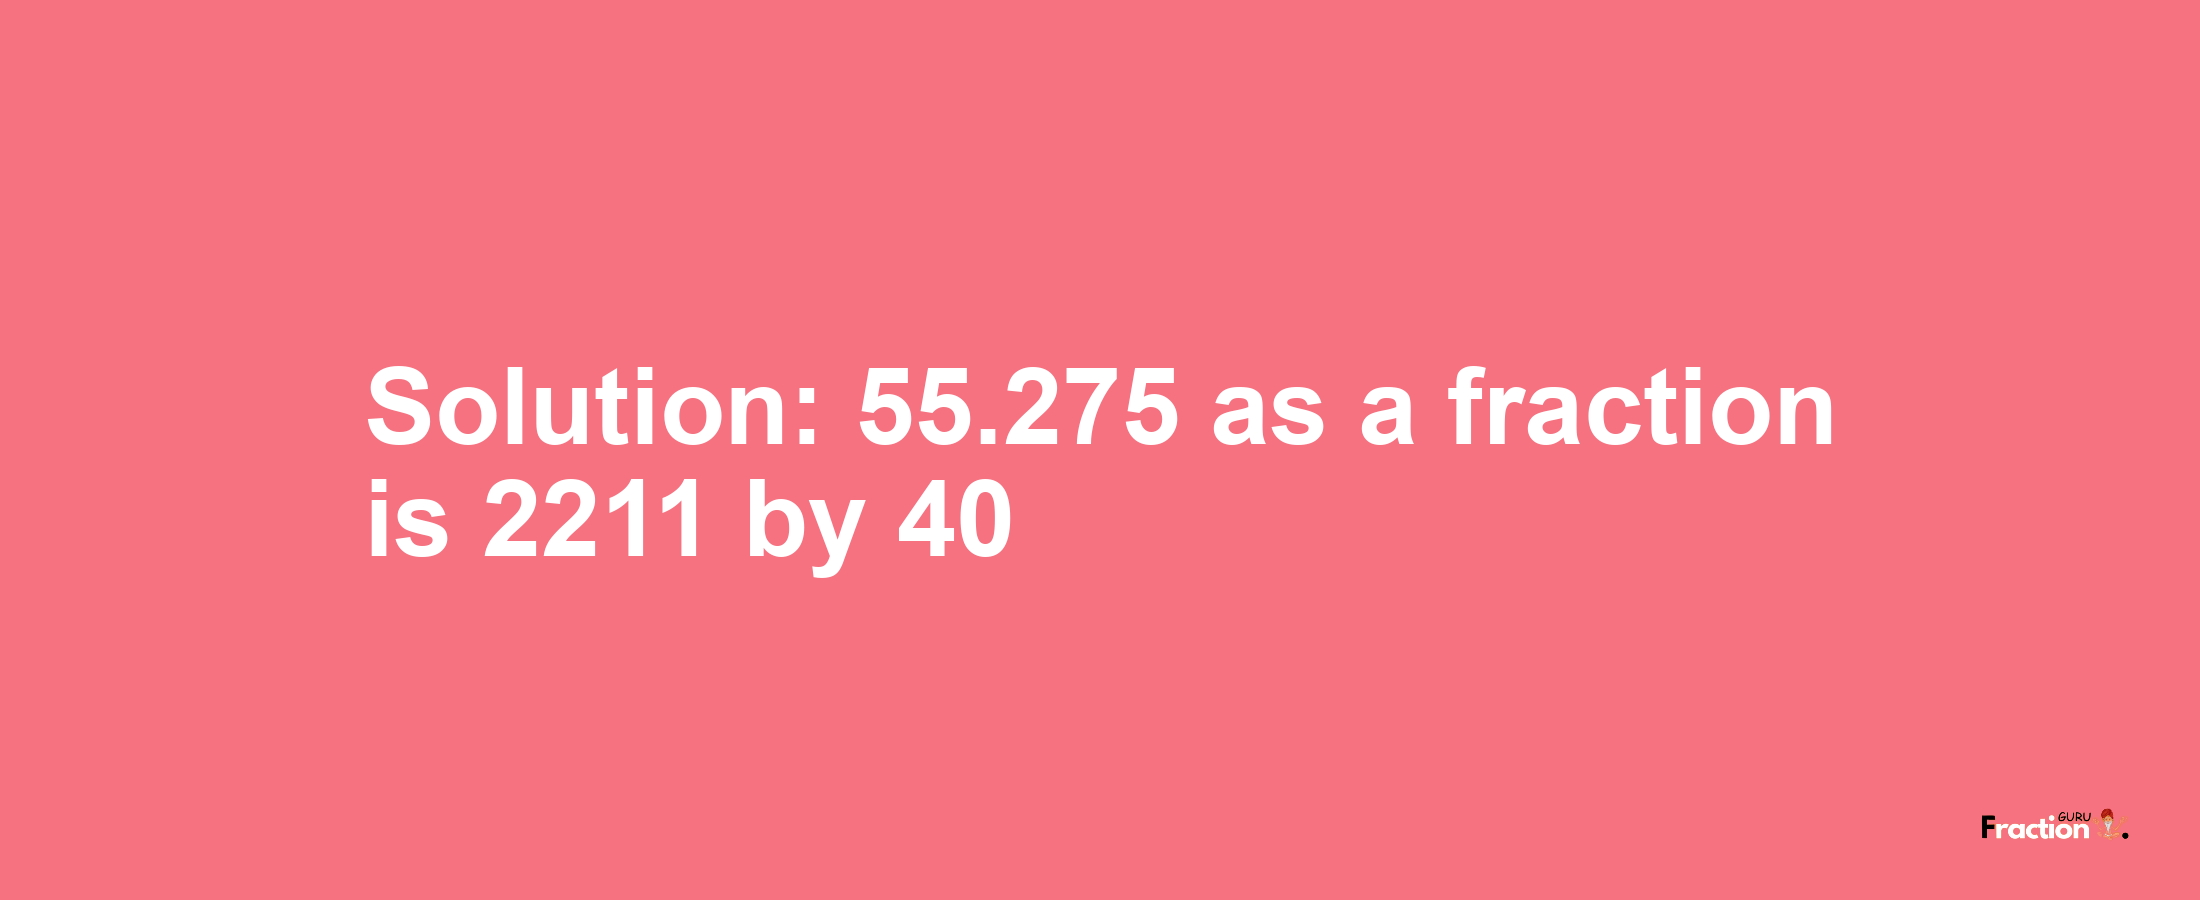 Solution:55.275 as a fraction is 2211/40